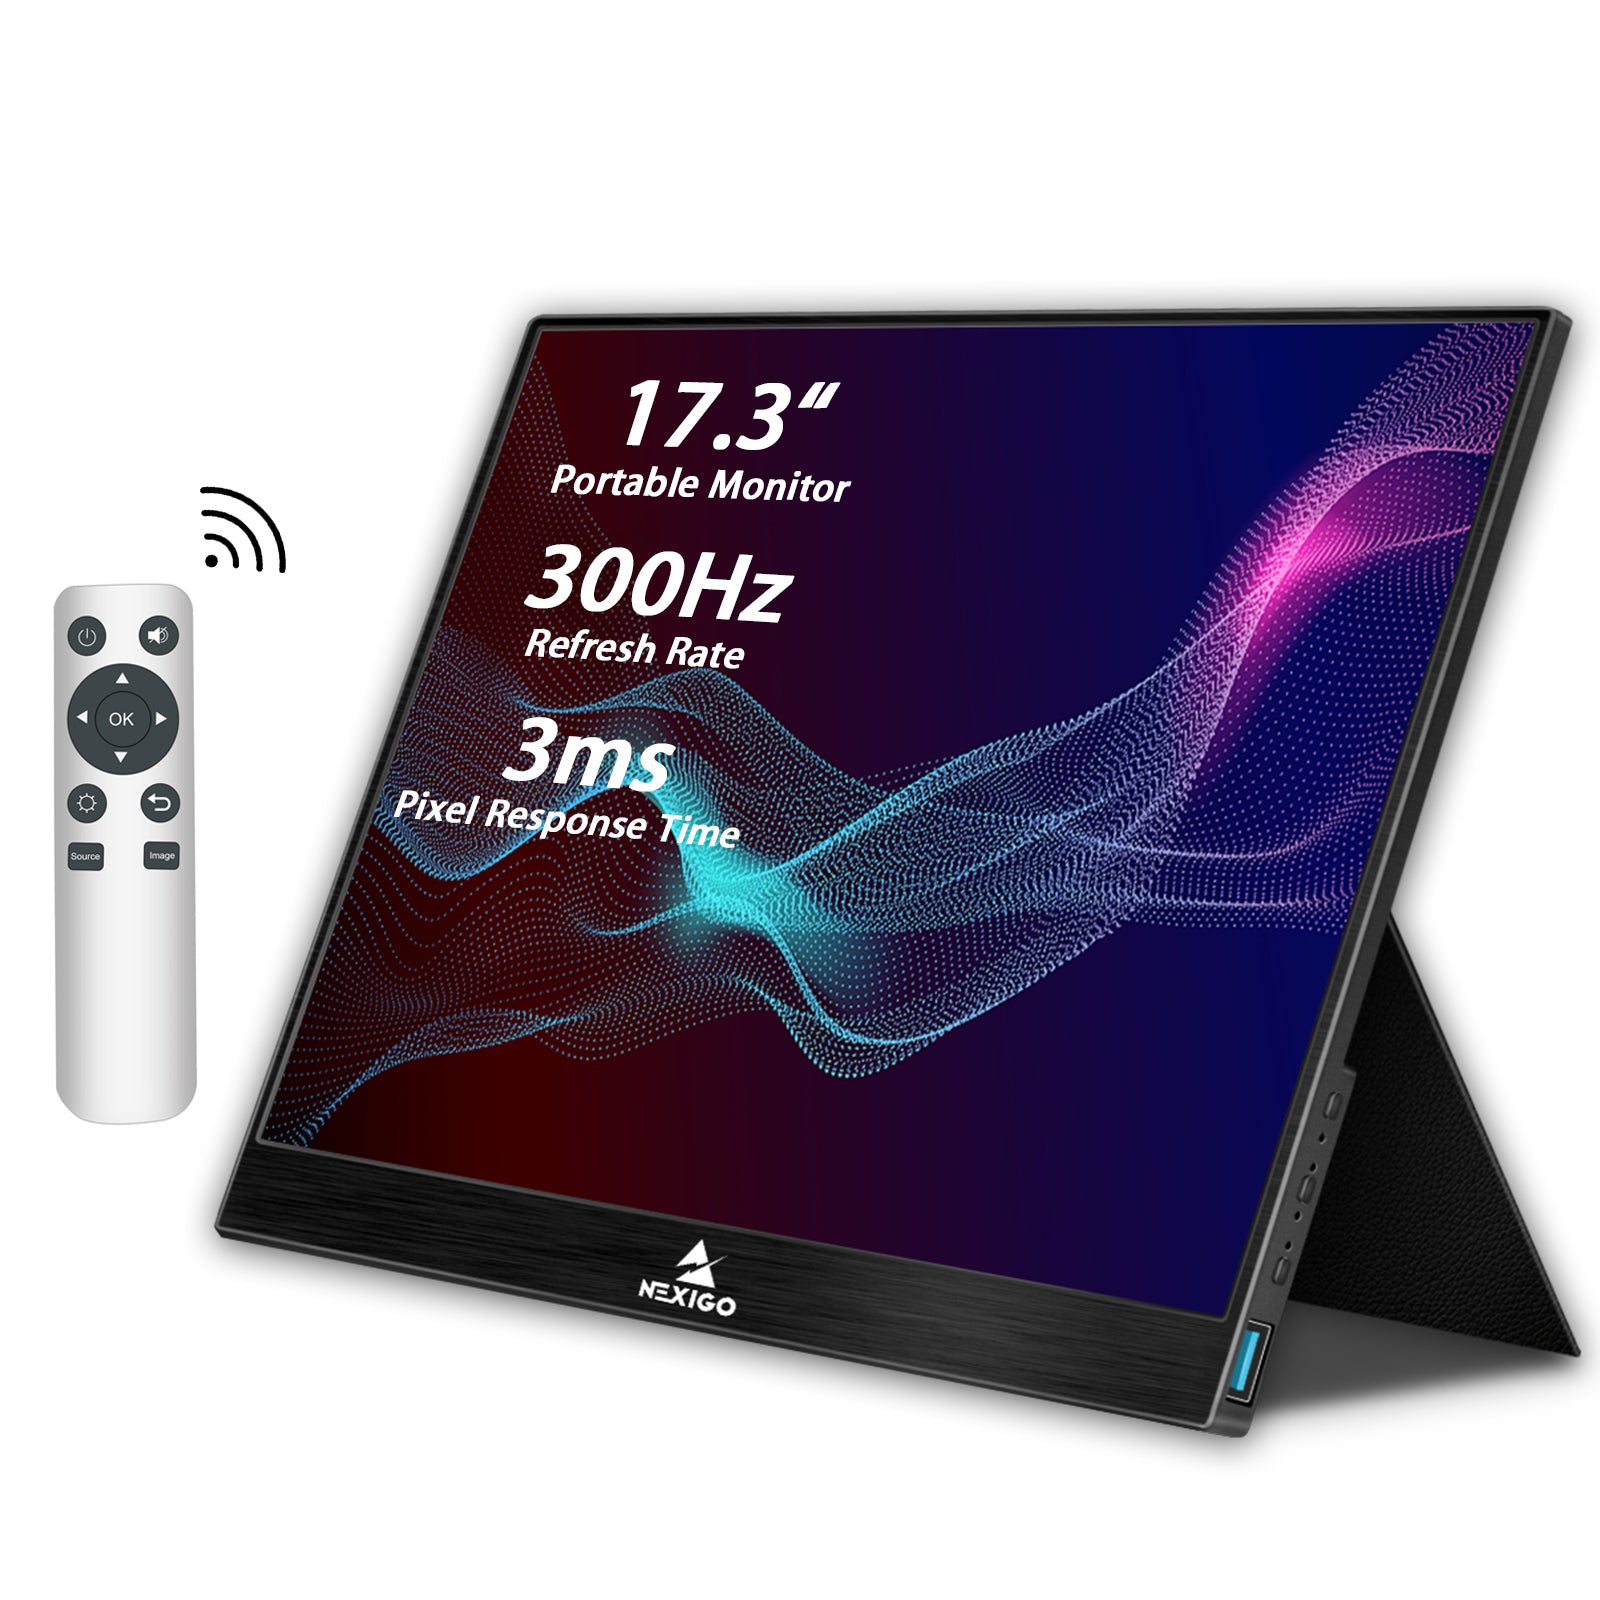 300Hz 17.3 Inch portable monitor with remote control and magnetic smart cover